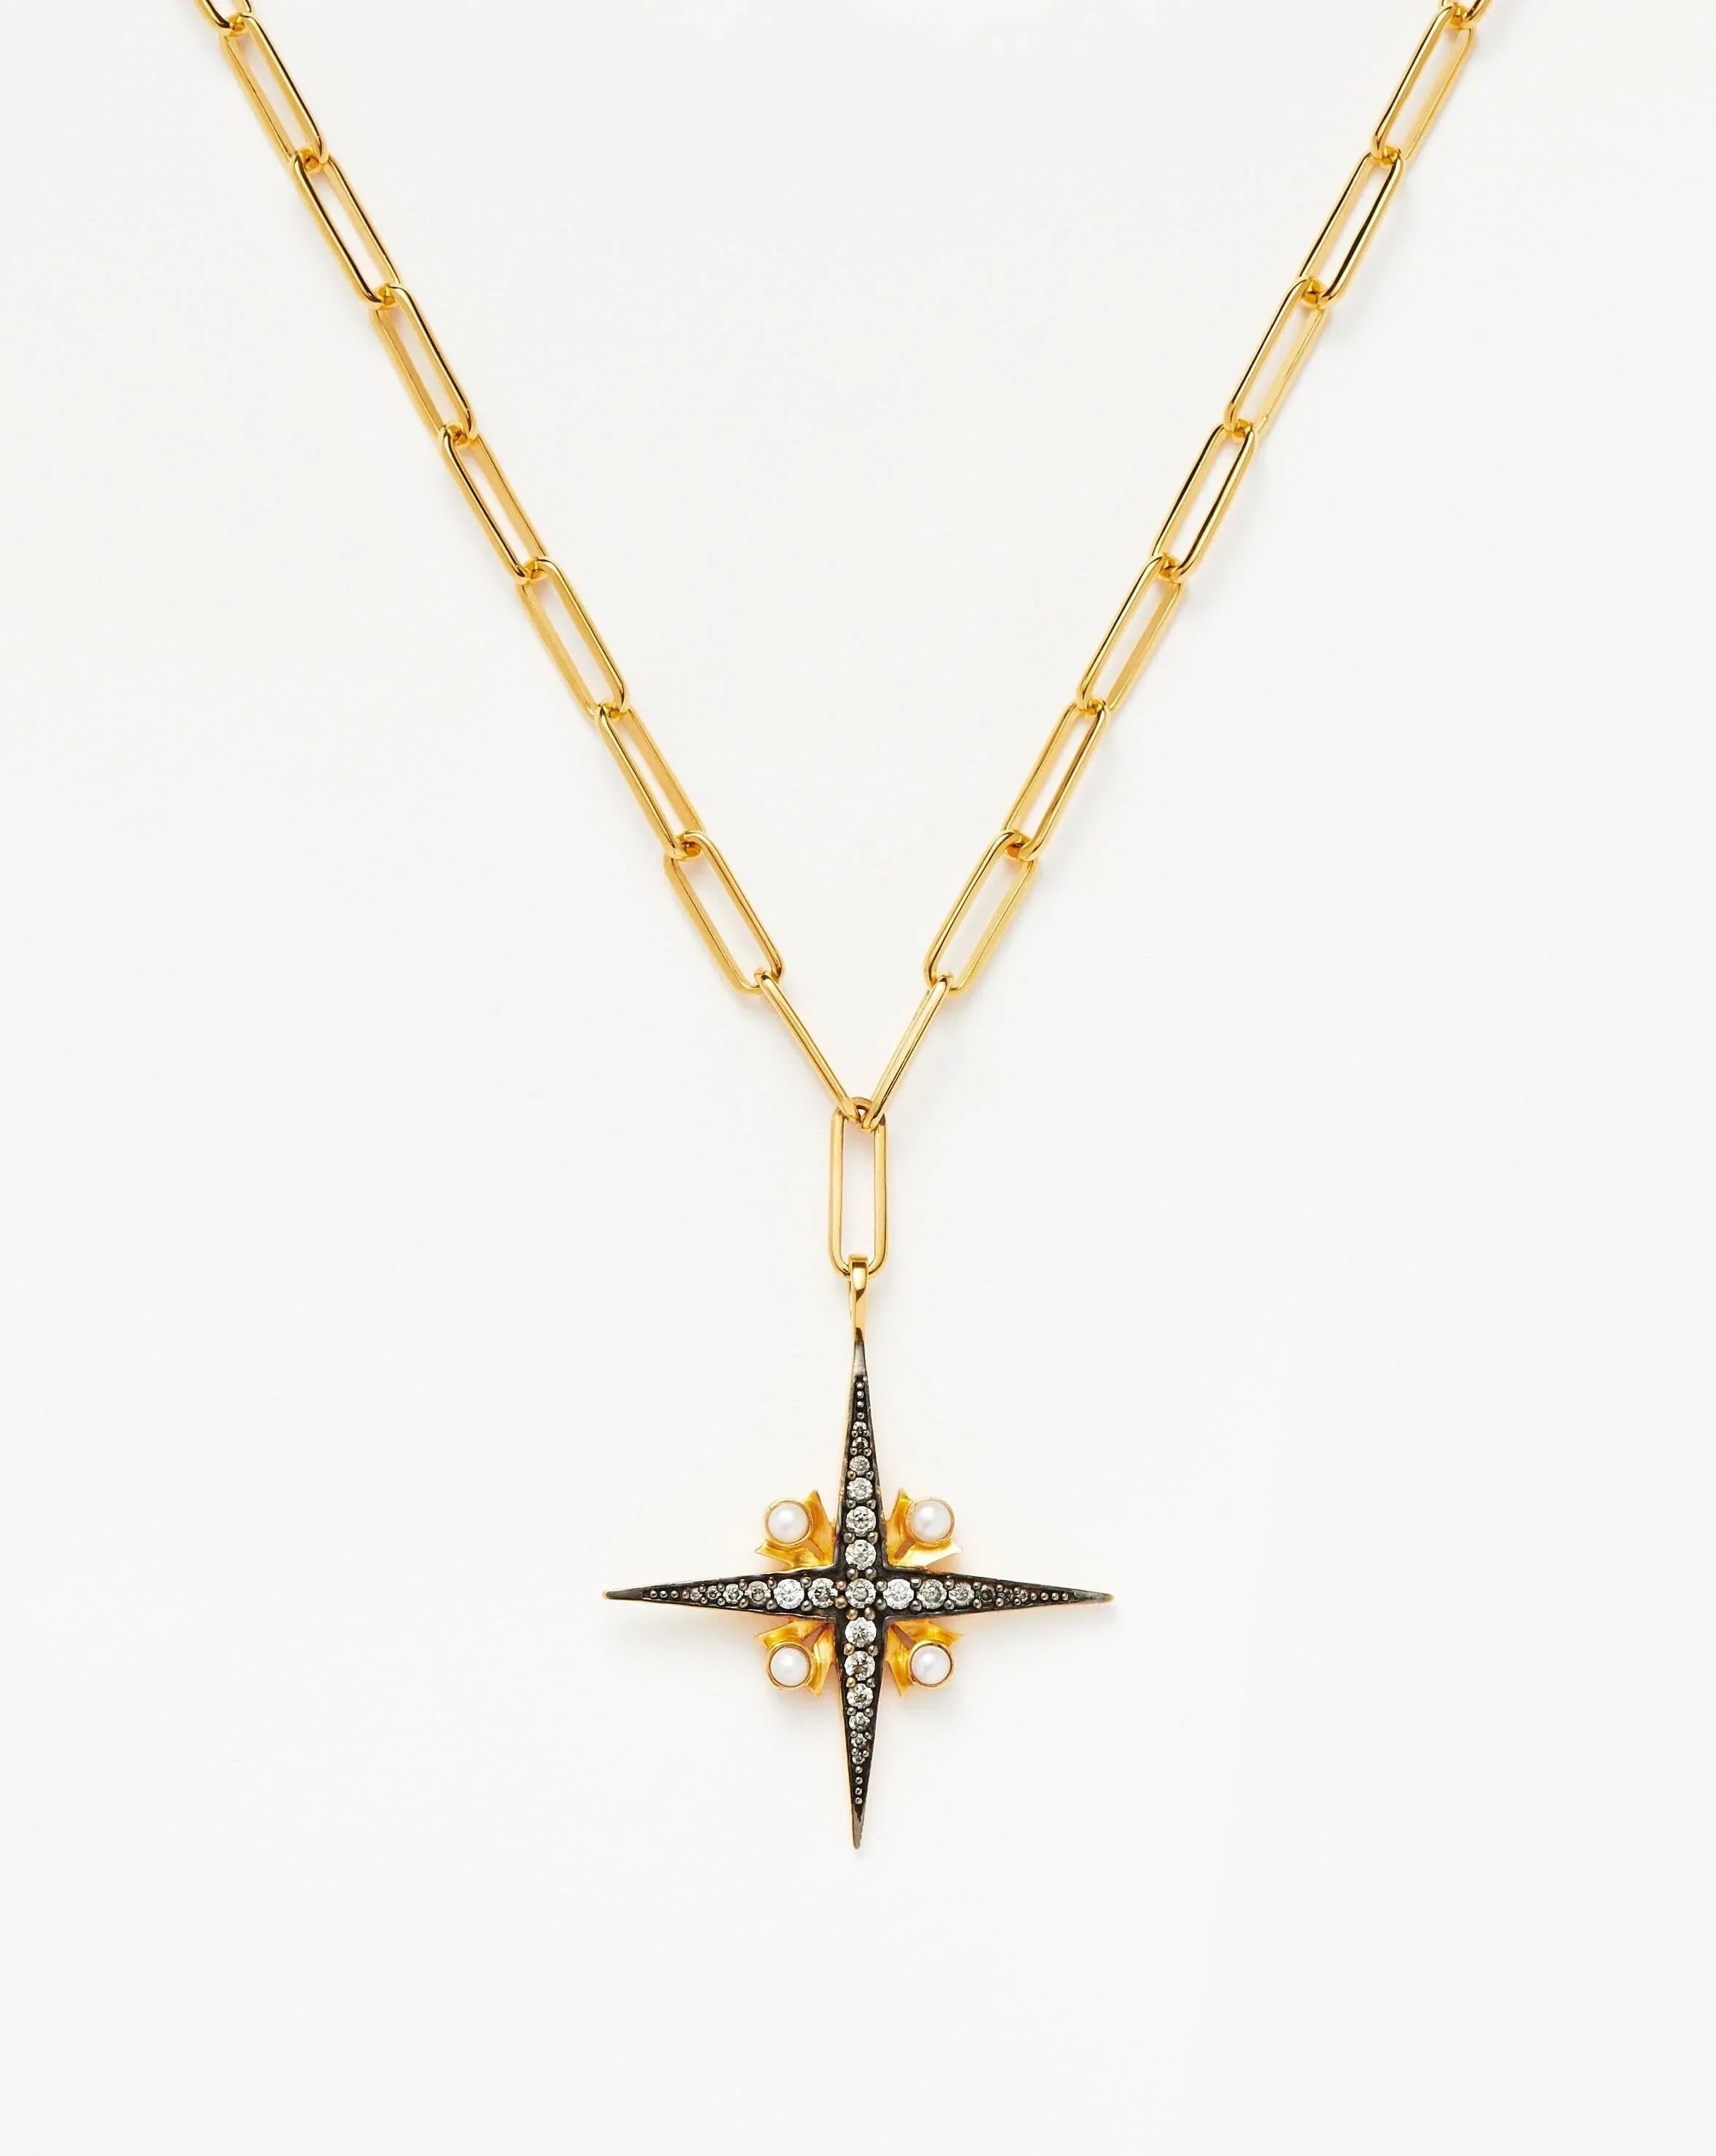 Louis Vuitton on X: Crafted to shine. A diamond pendant necklace